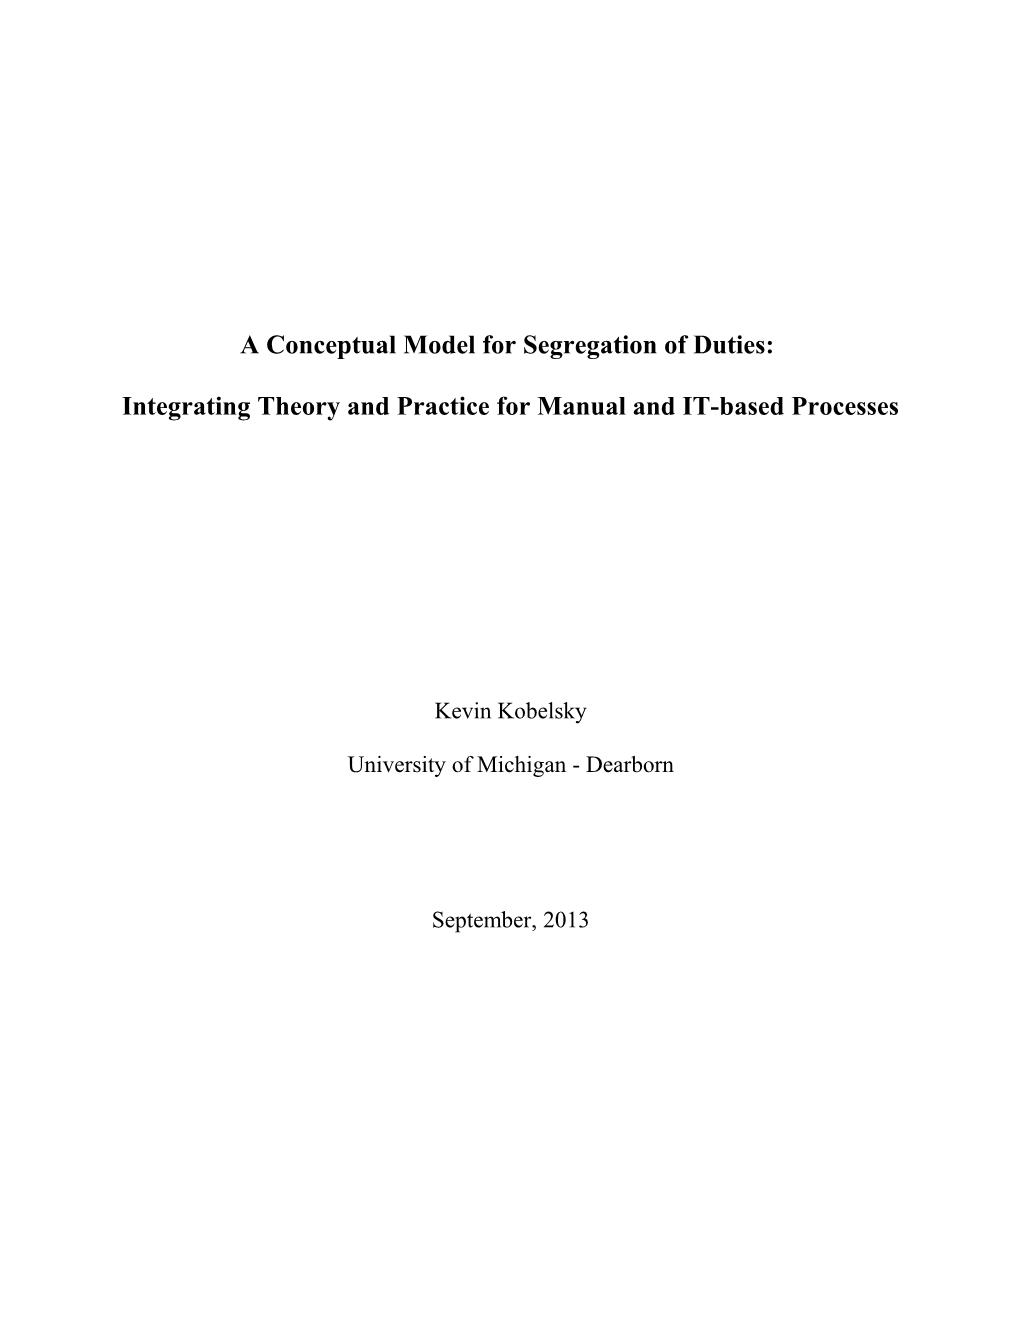 A Conceptual Model for Segregation of Duties in Manual and IT-Based Processes